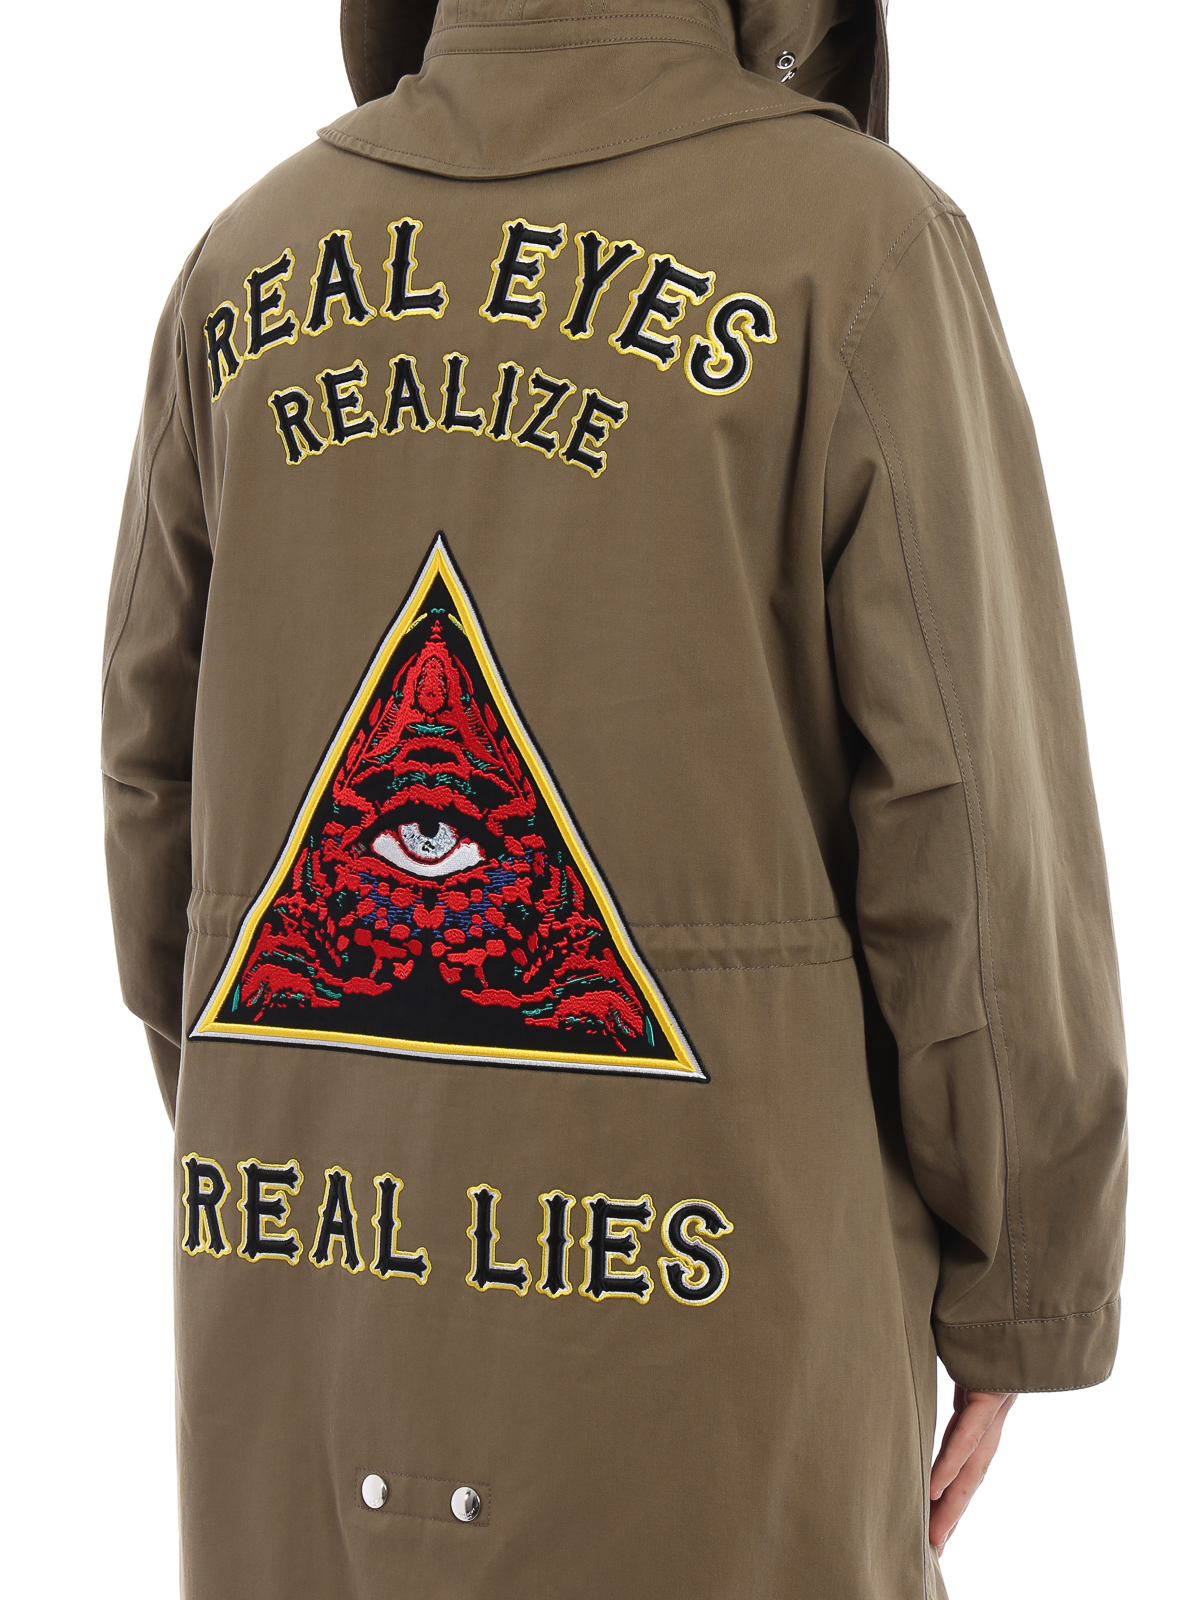 givenchy real eyes realize real lies